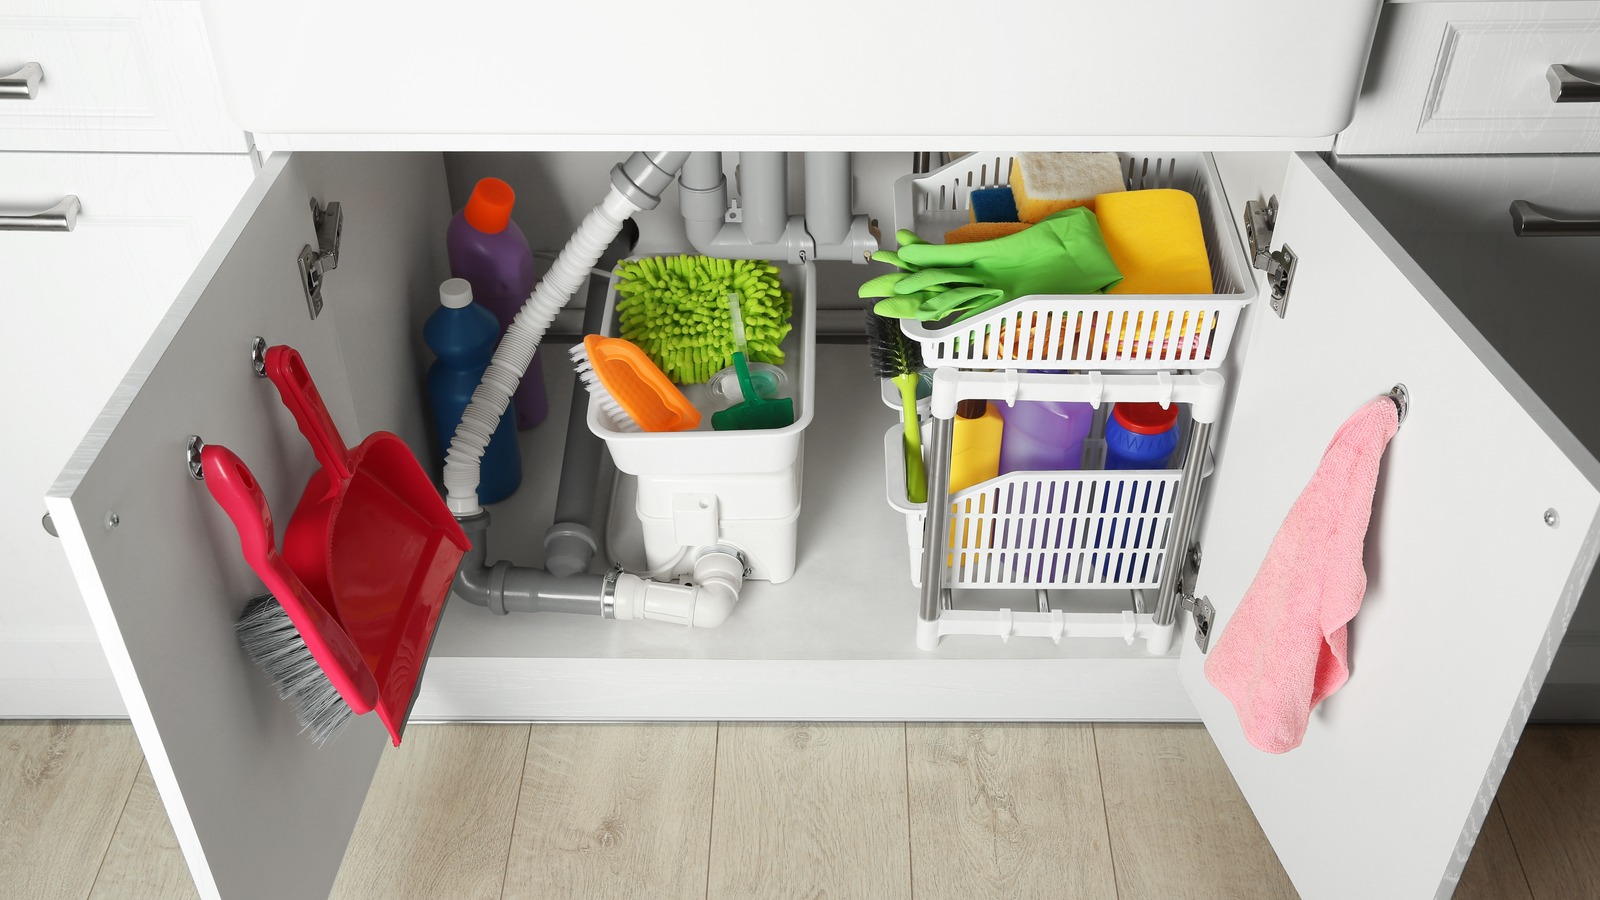 4 Things You Should Purge From Under Your Kitchen Sink